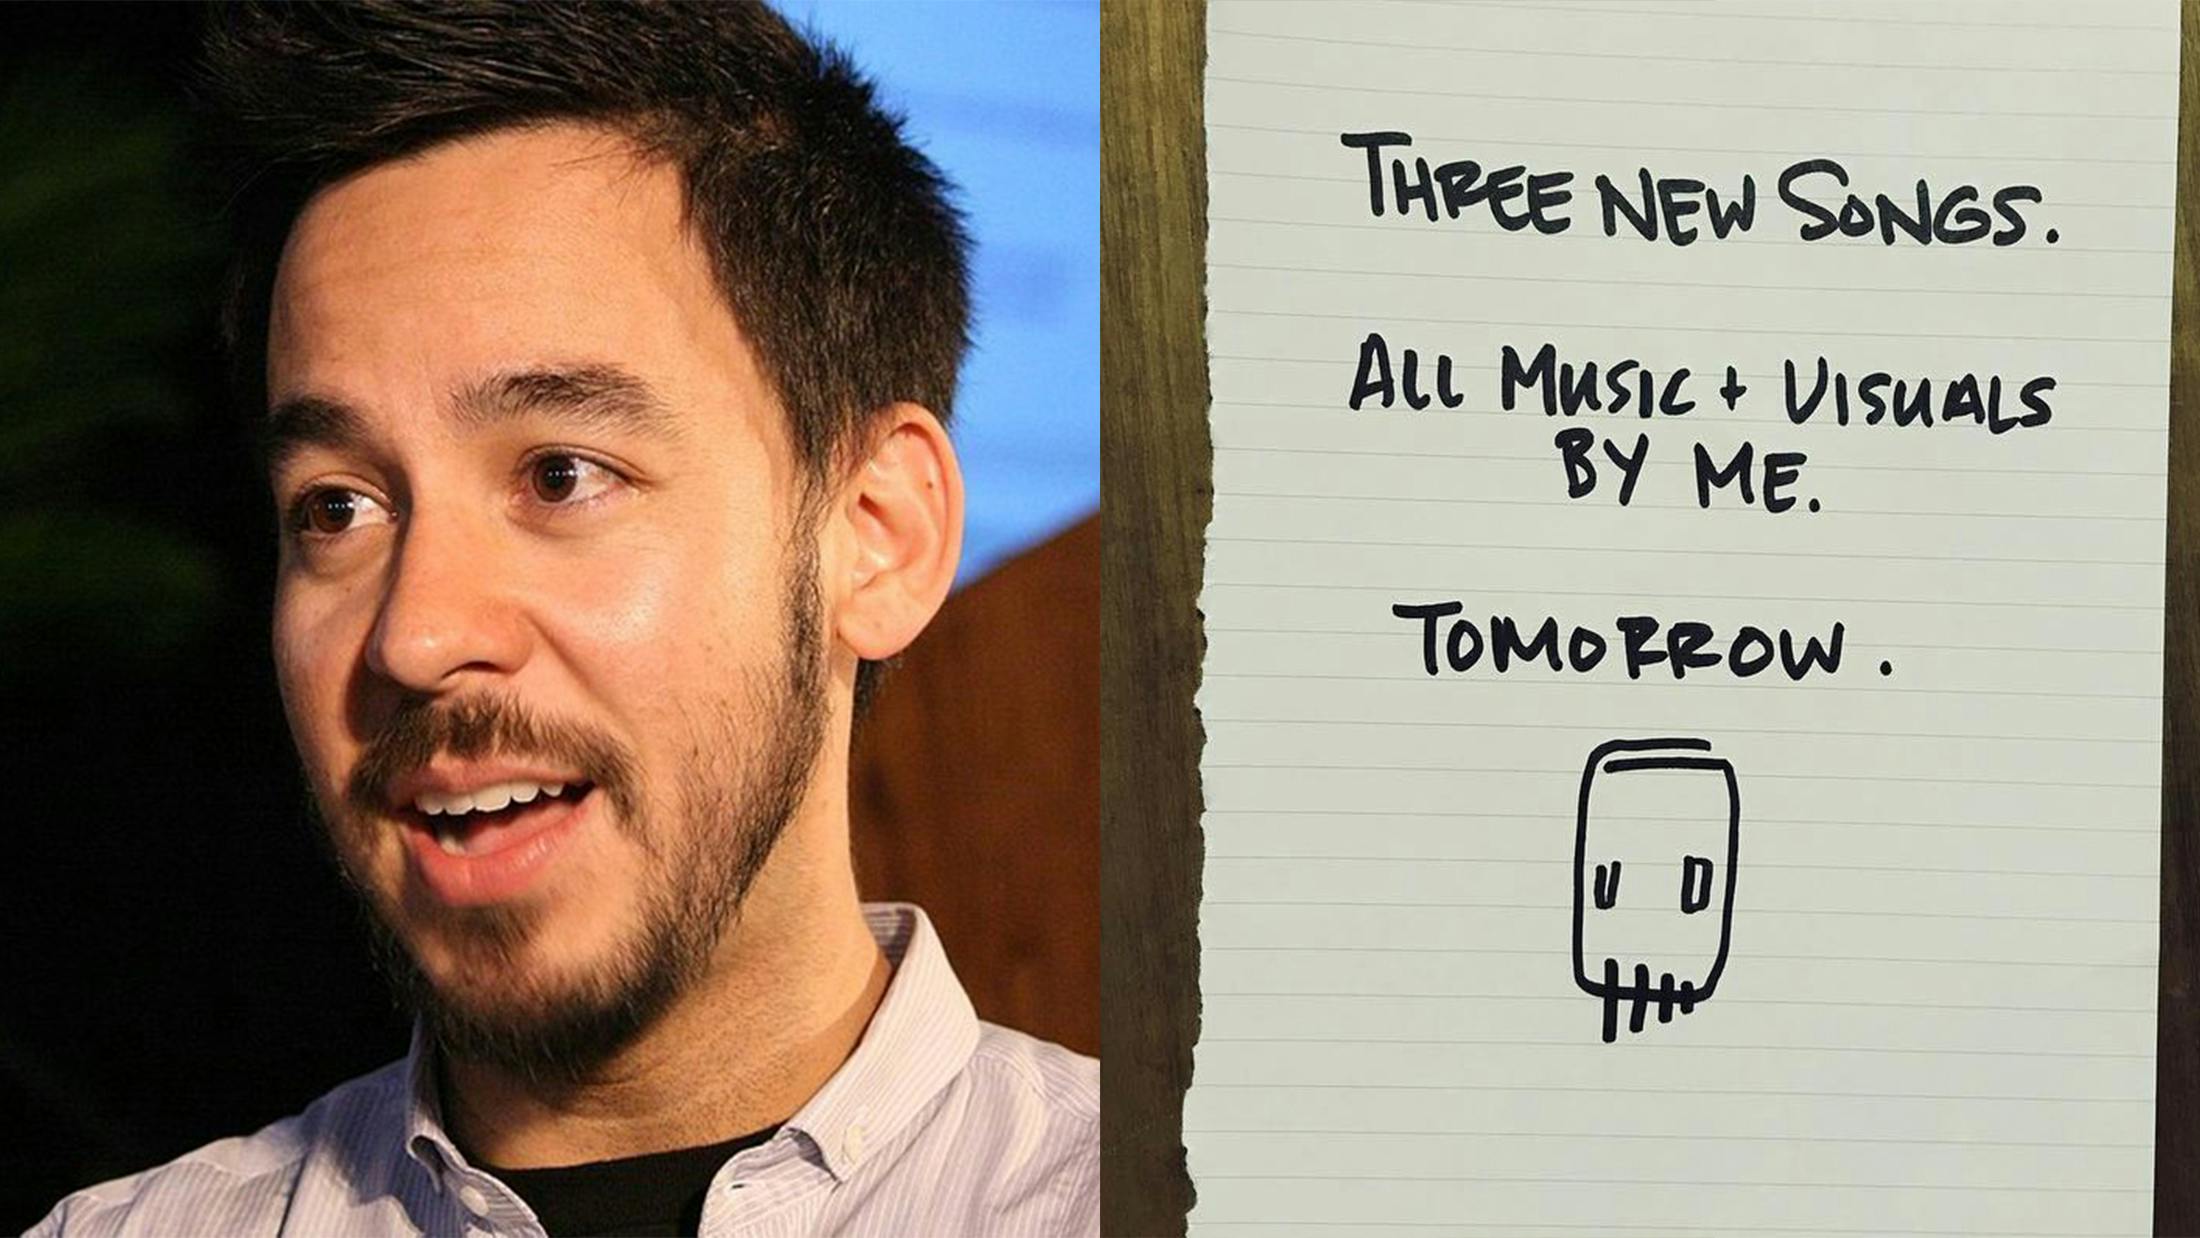 Mike Shinoda Of Linkin Park To Drop Three New Songs Today